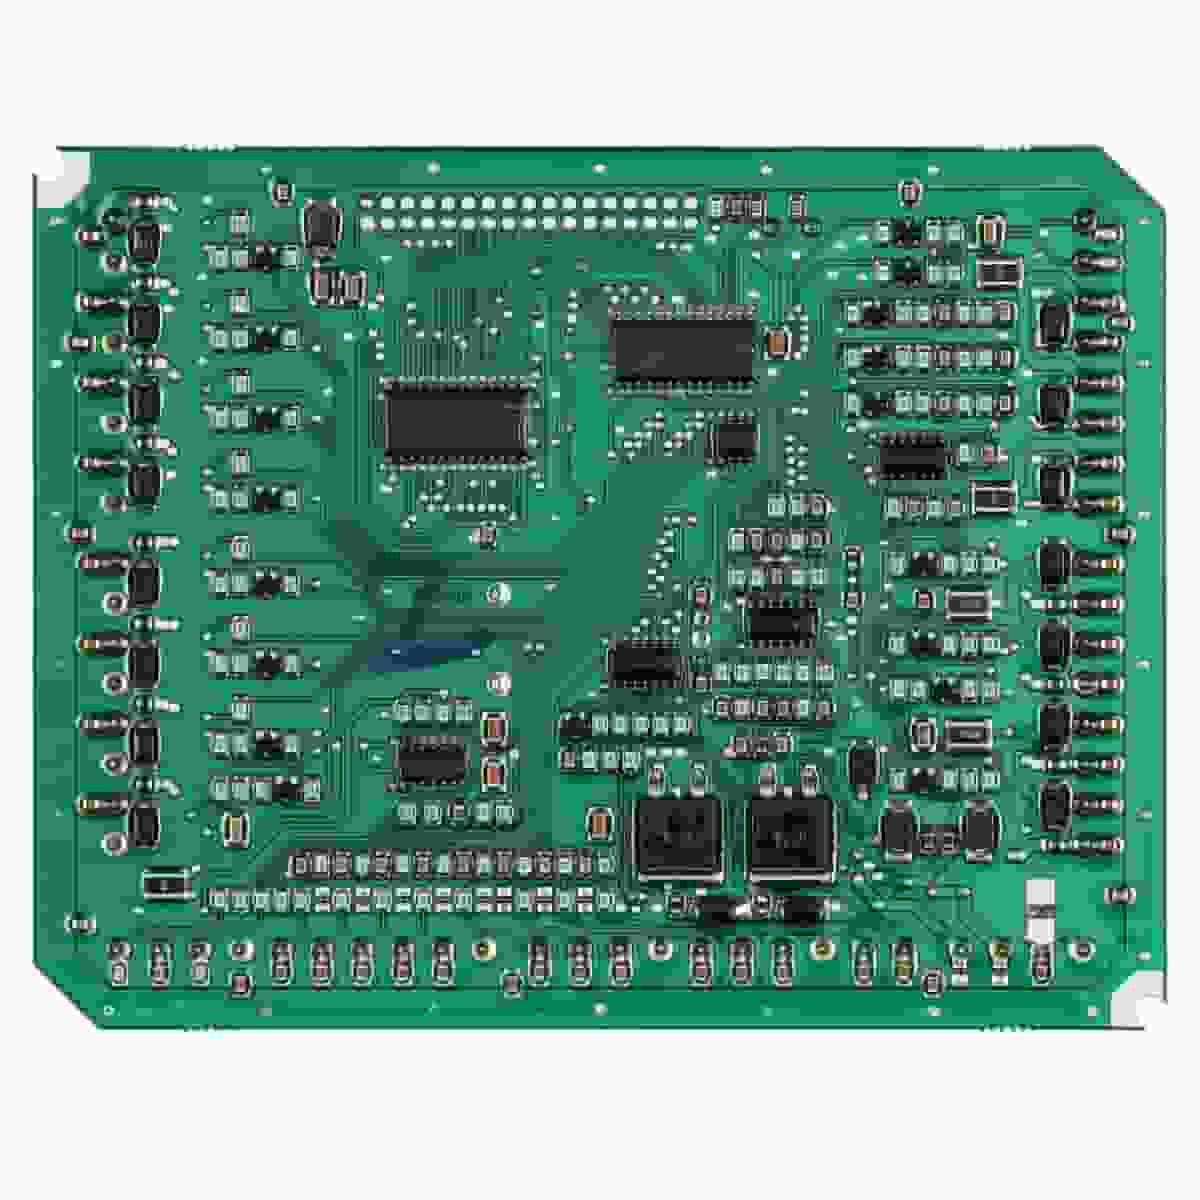 Guide to Multilayer Printed Circuit Board Design and Manufacturing